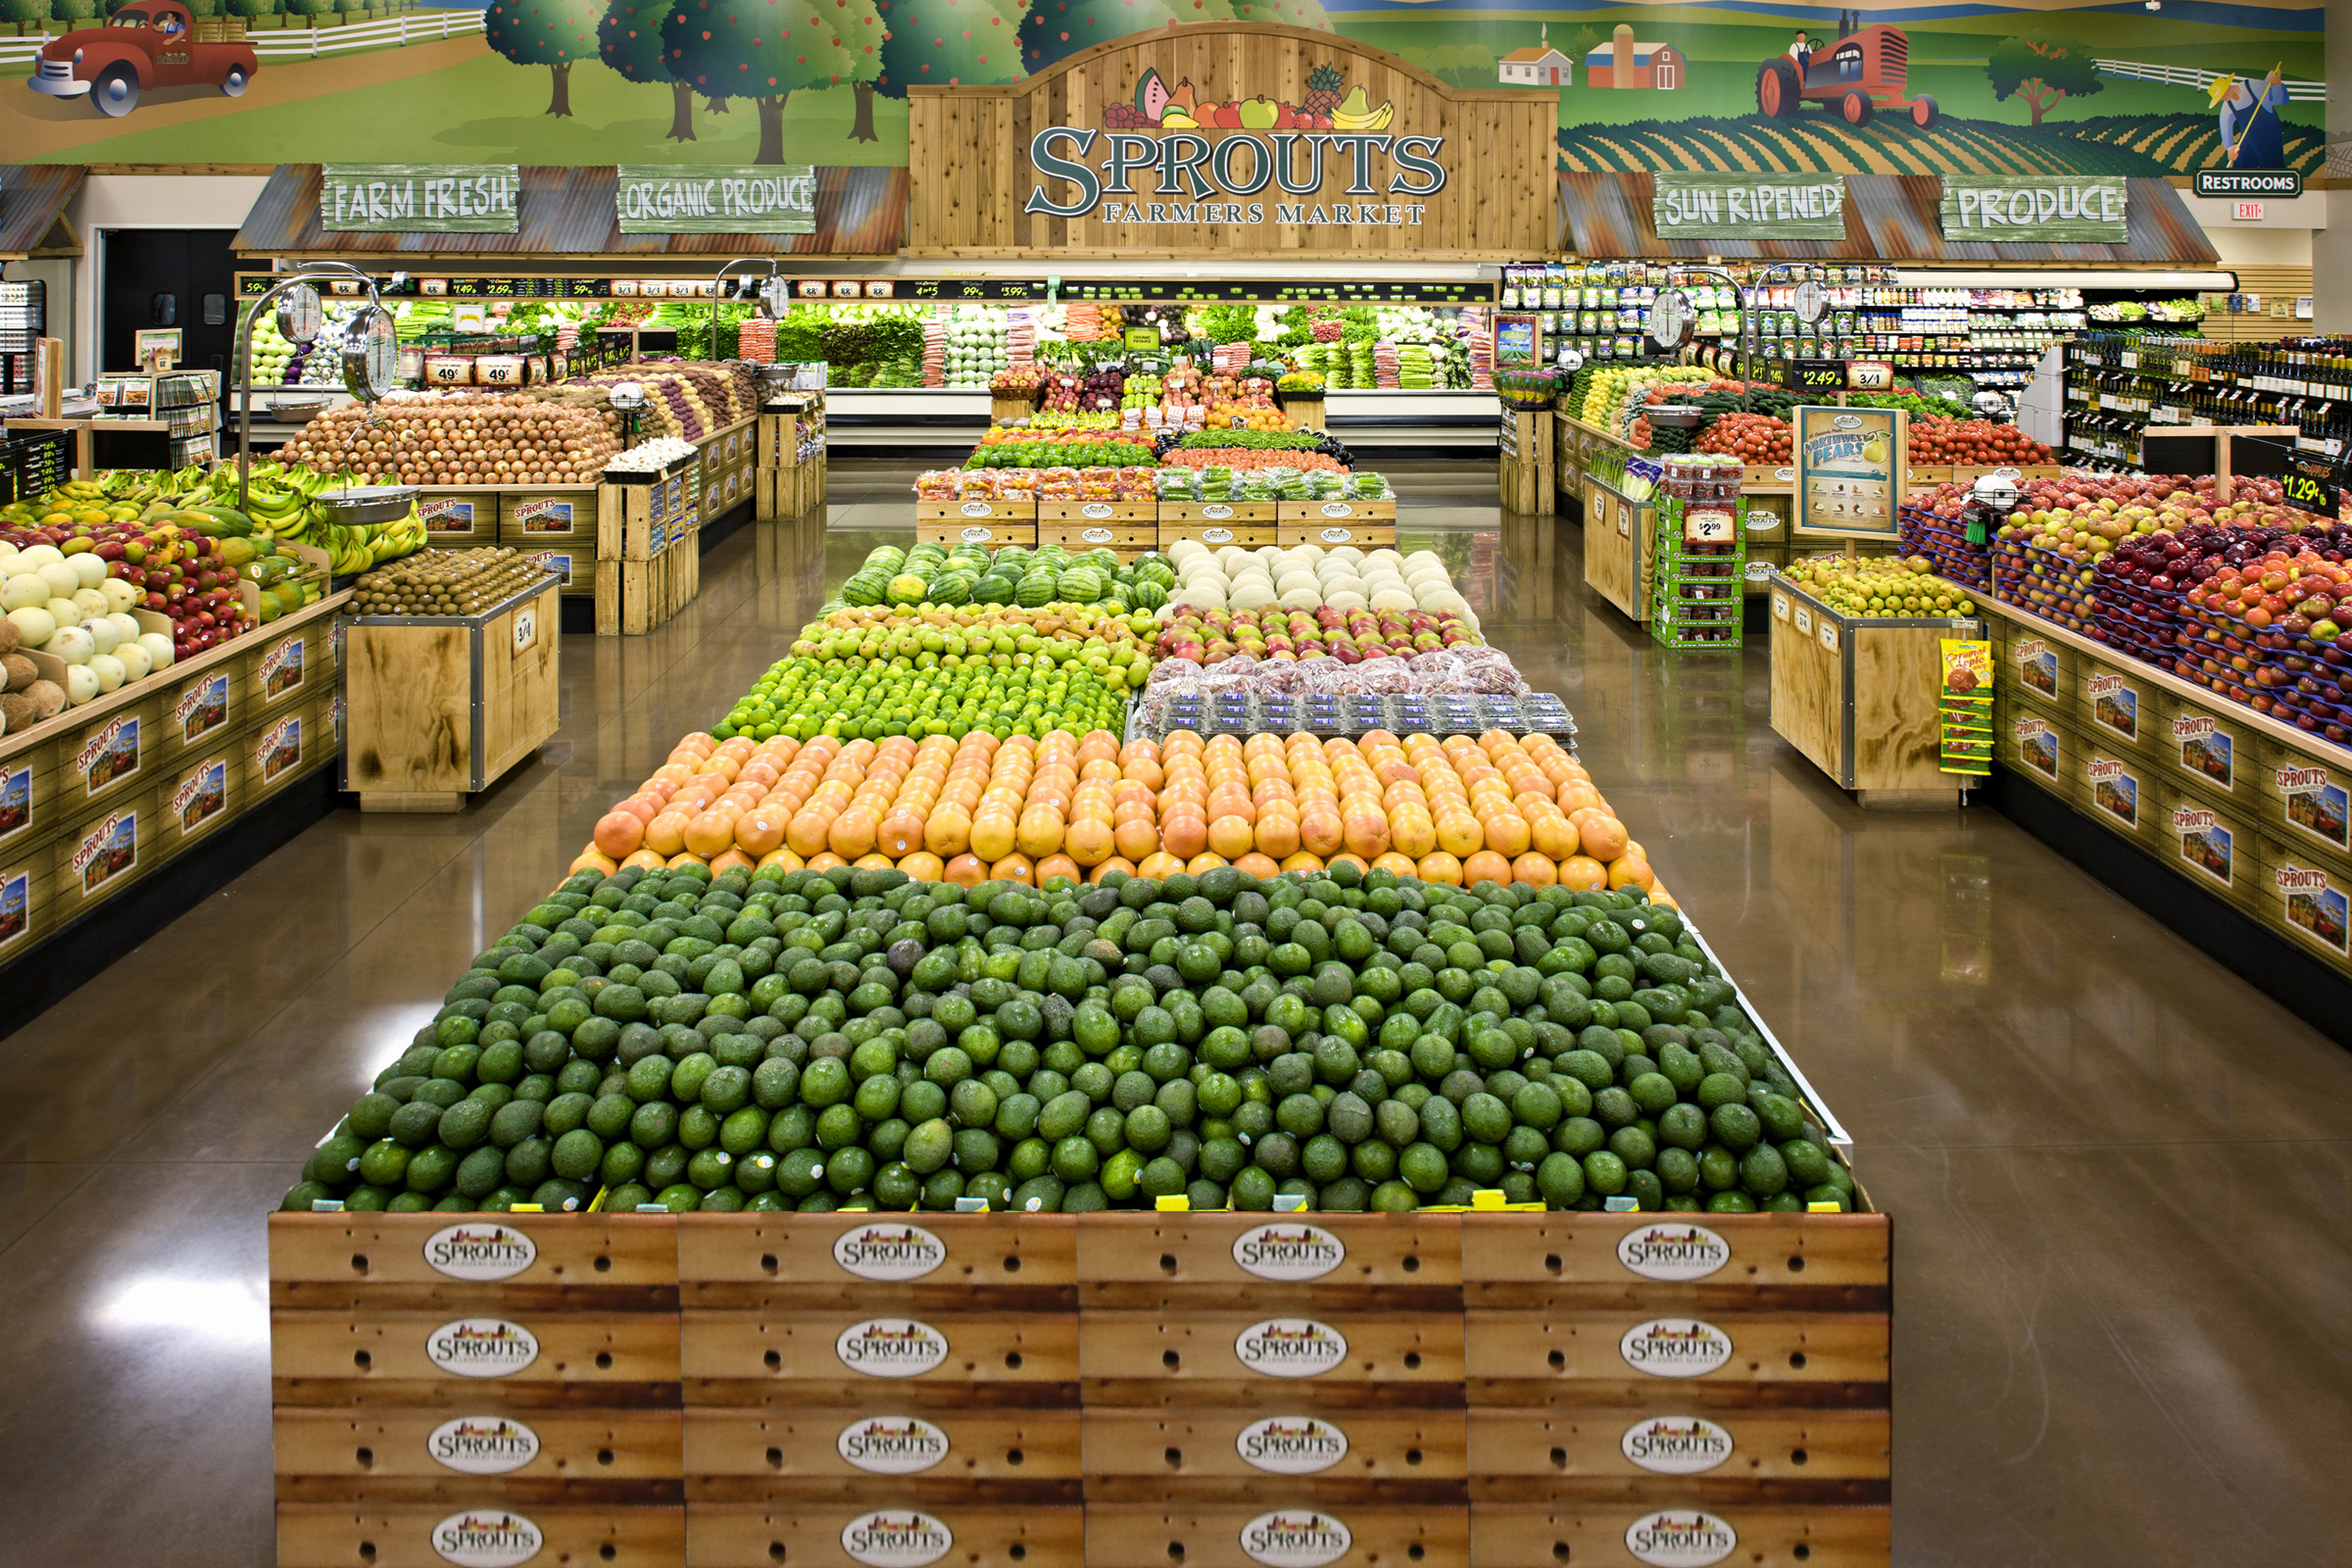 Sprouts Store Produce